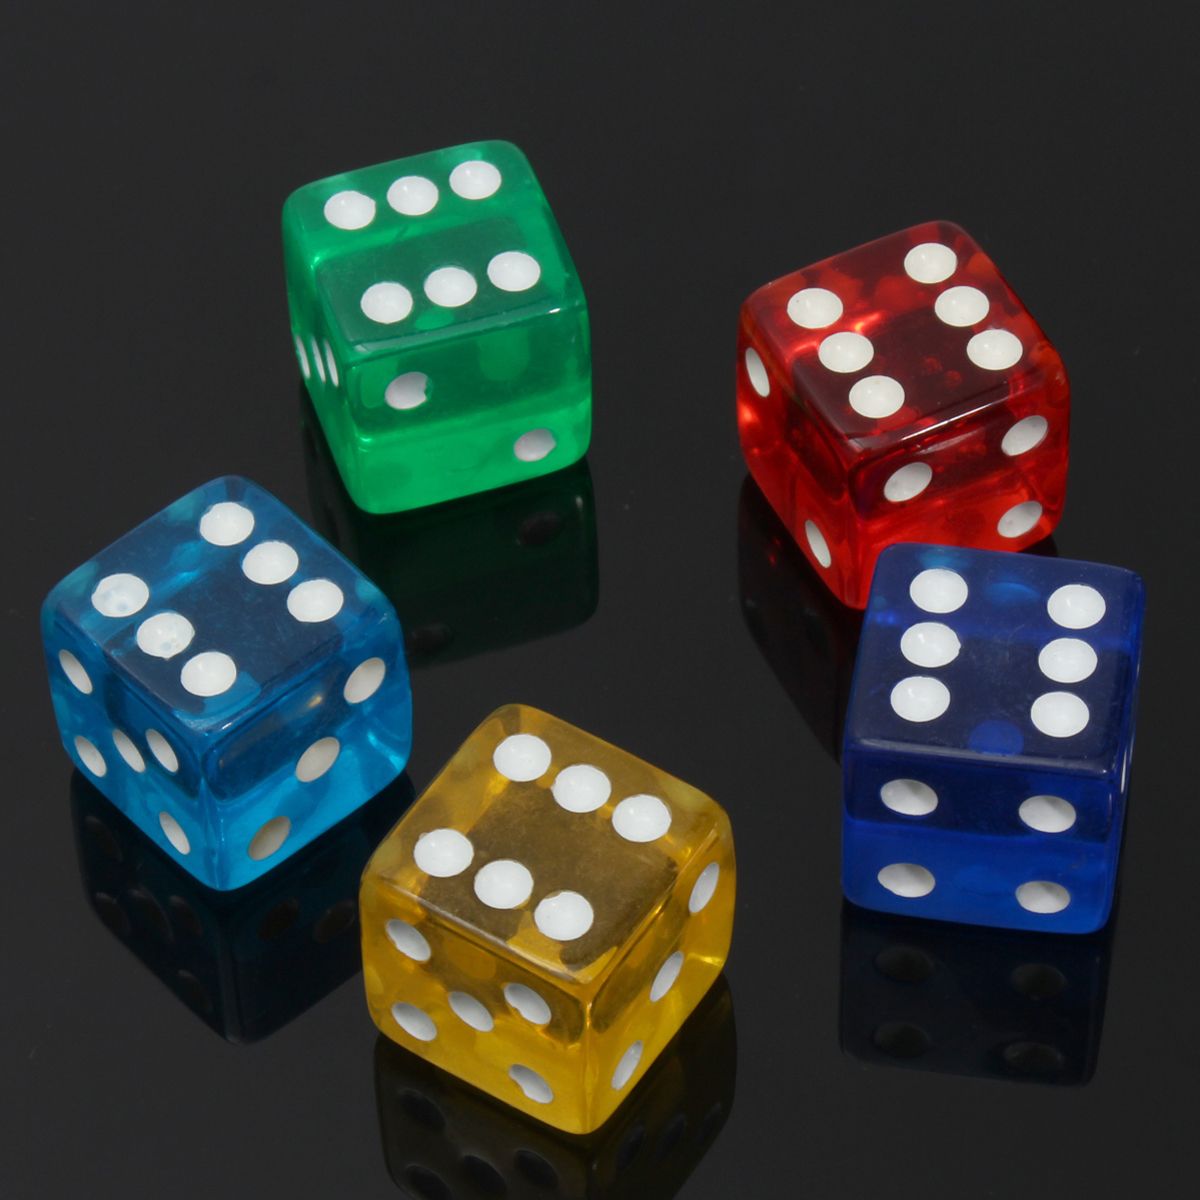 10PCS-19mm-Acrylic-Gaming-Dice-Standard-Six-Sided-Die-5-Colors-1173315